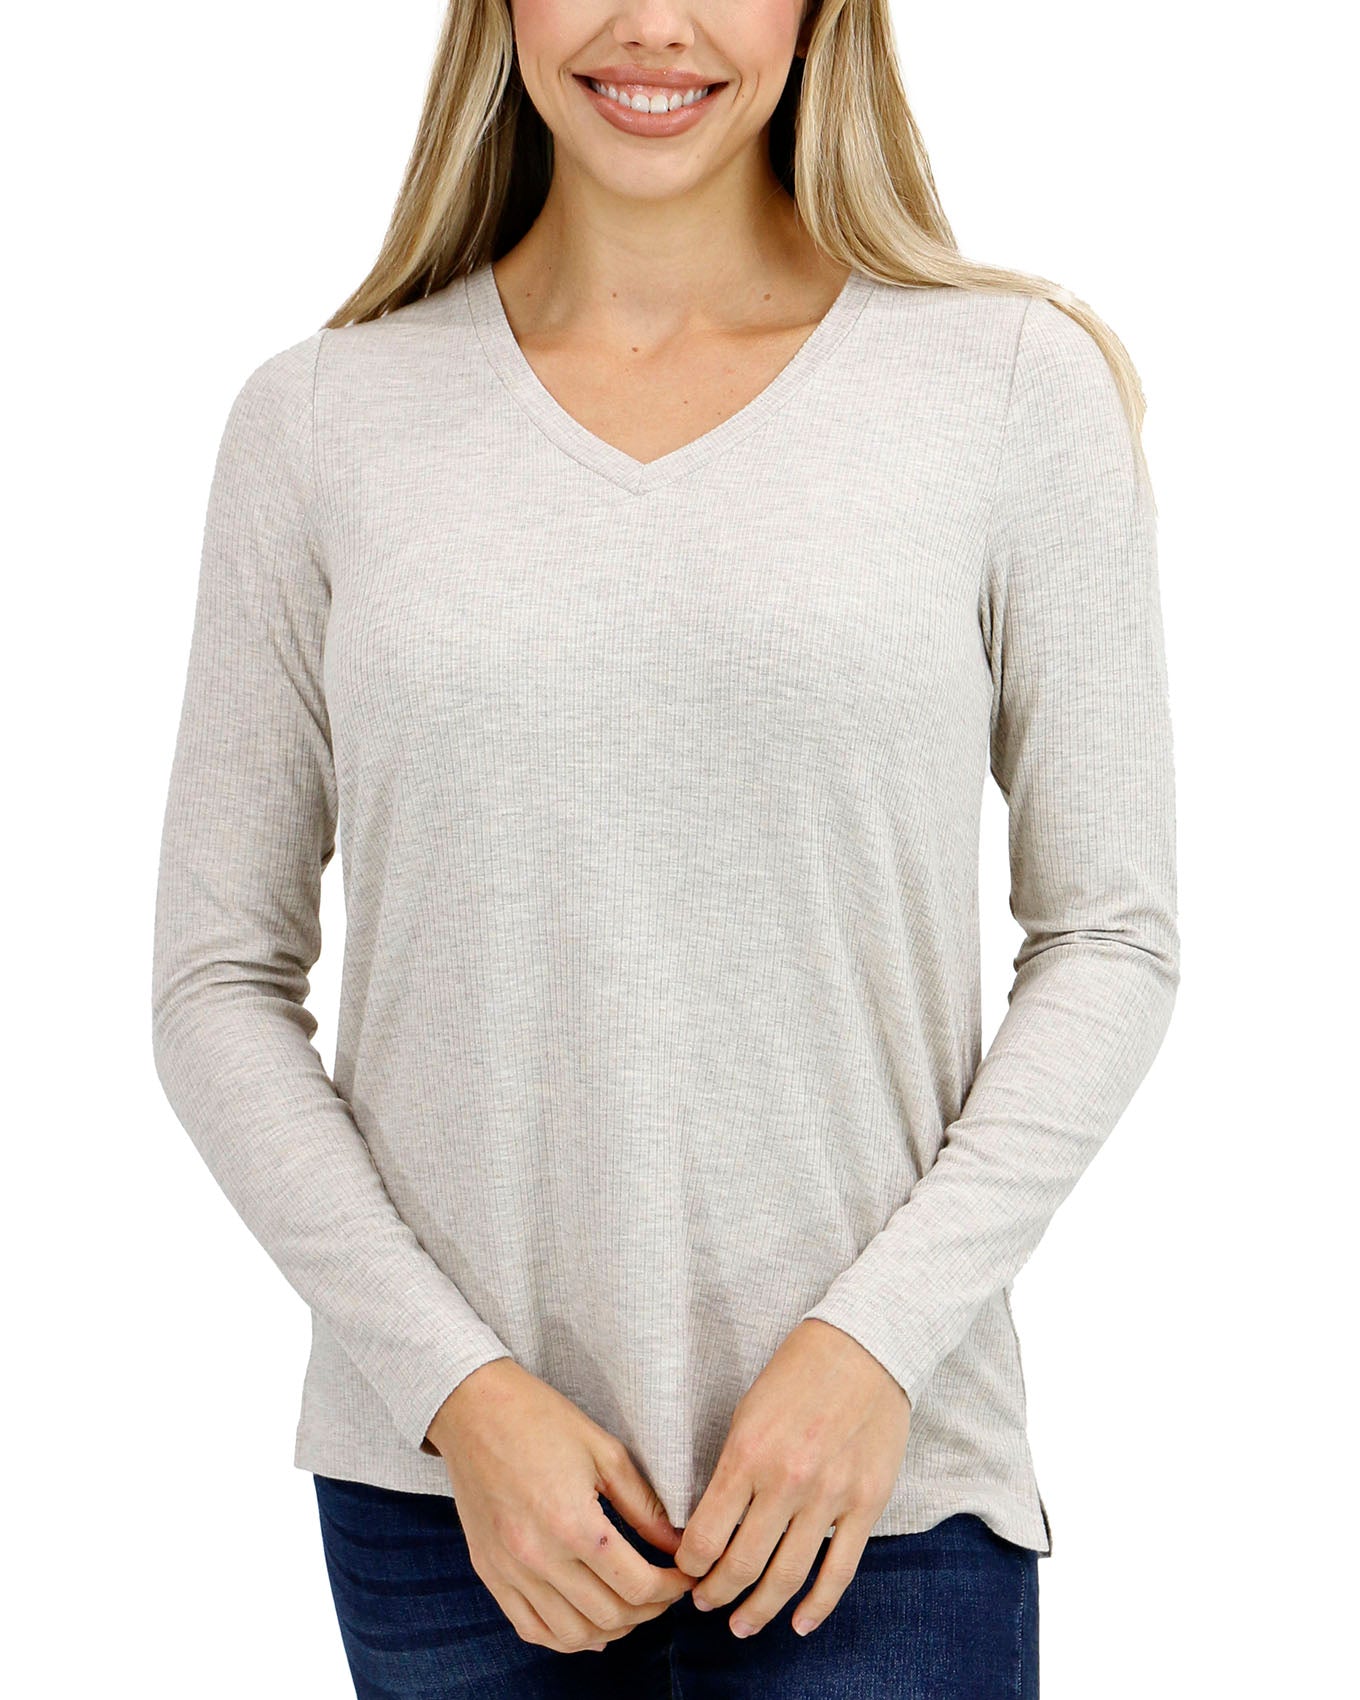 Heathered Oatmeal Ribbed Long Sleeve Top - FINAL SALE - Grace and Lace